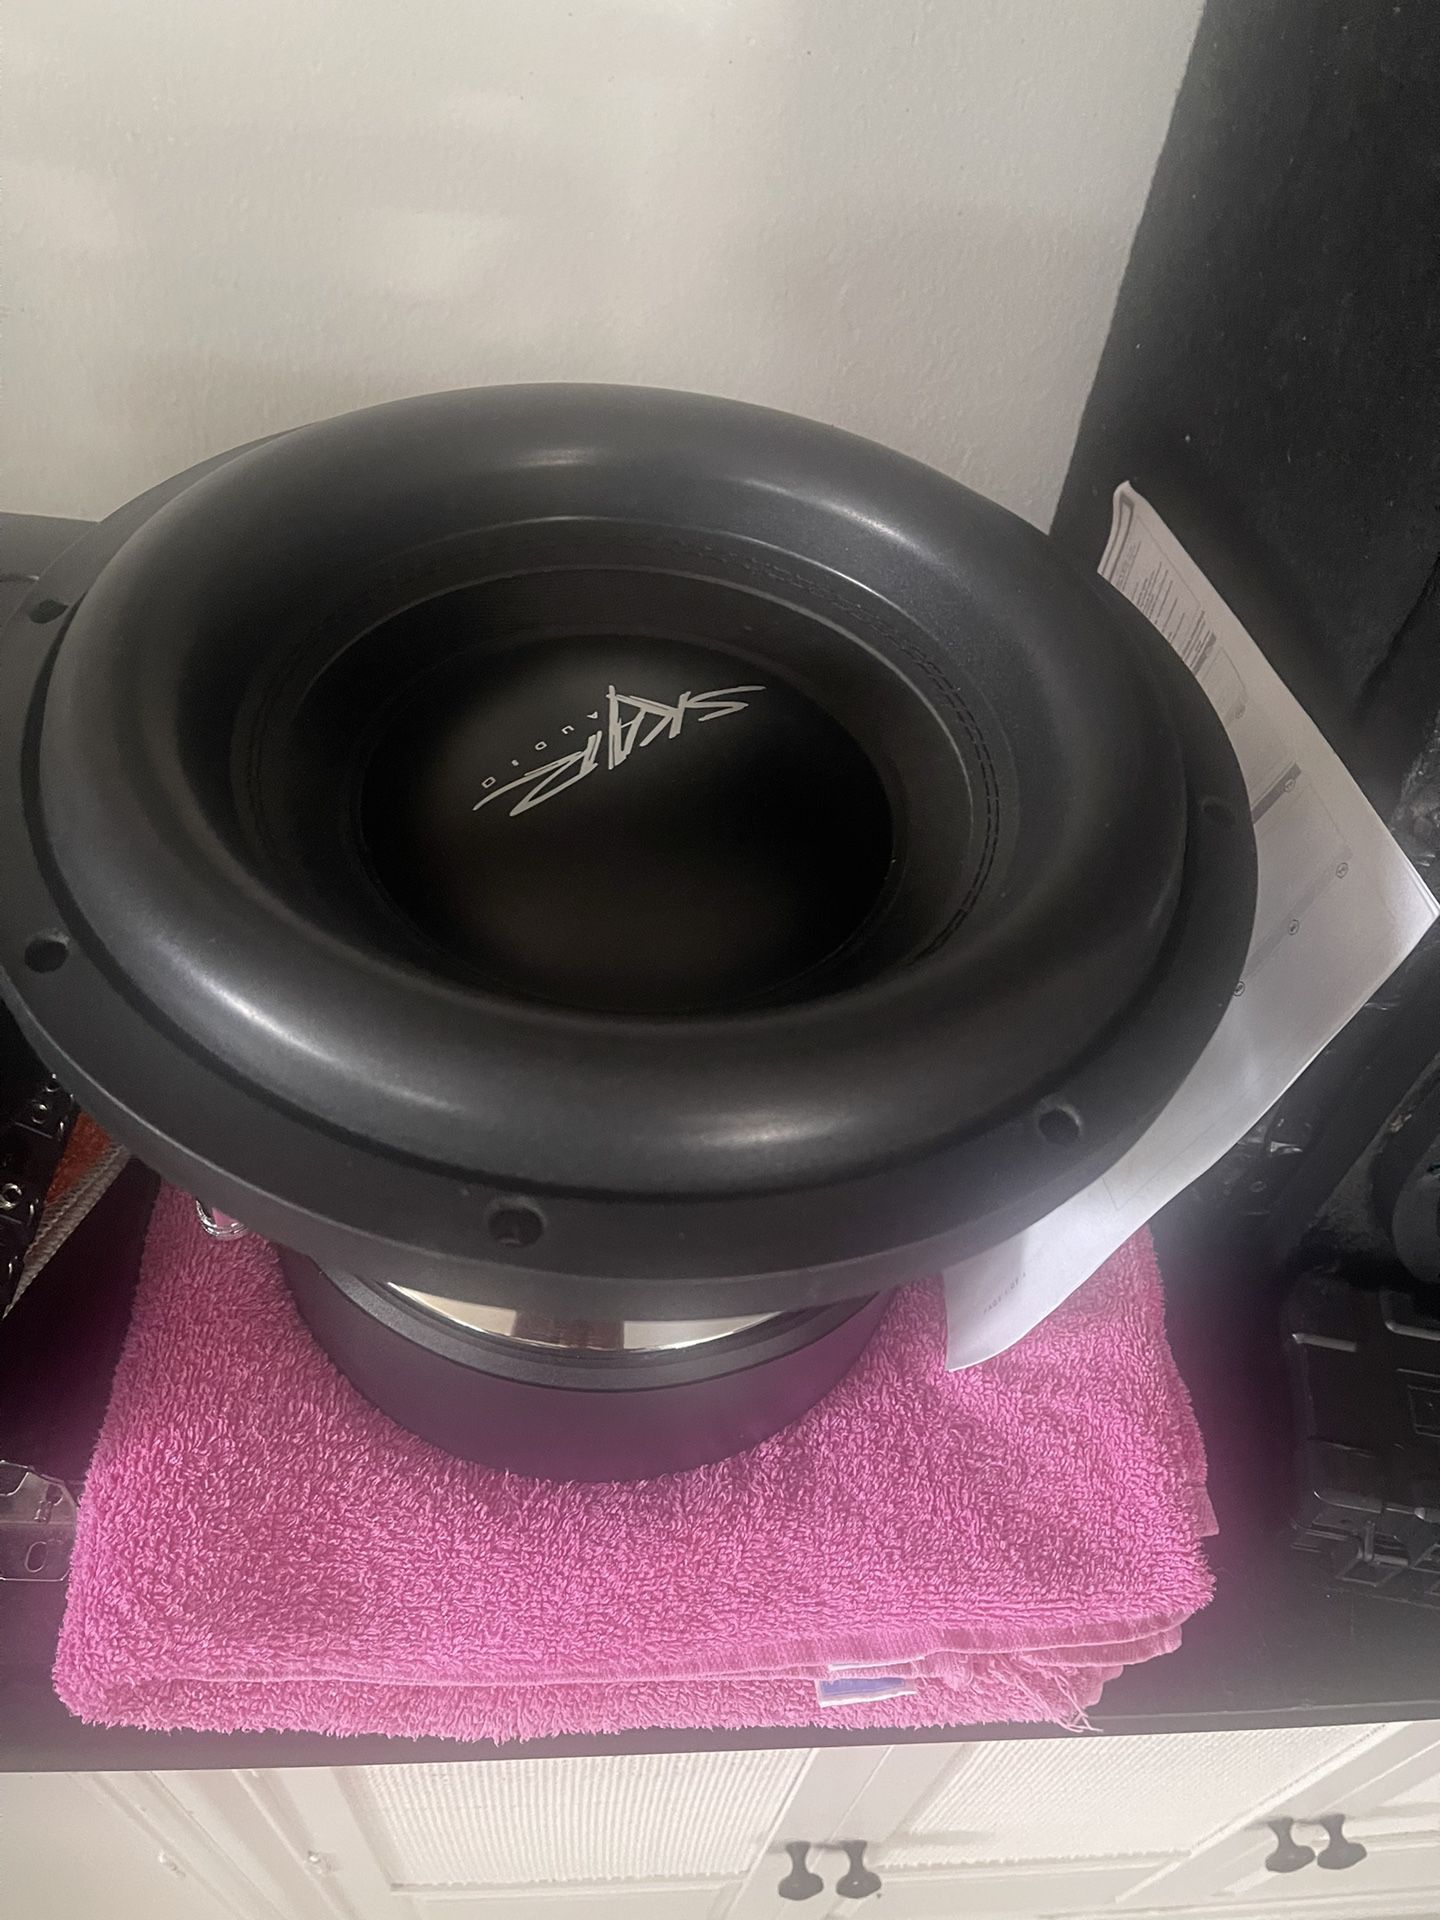 I Have A Skar Subwoofer 12” 1500 Watts Rms Like New